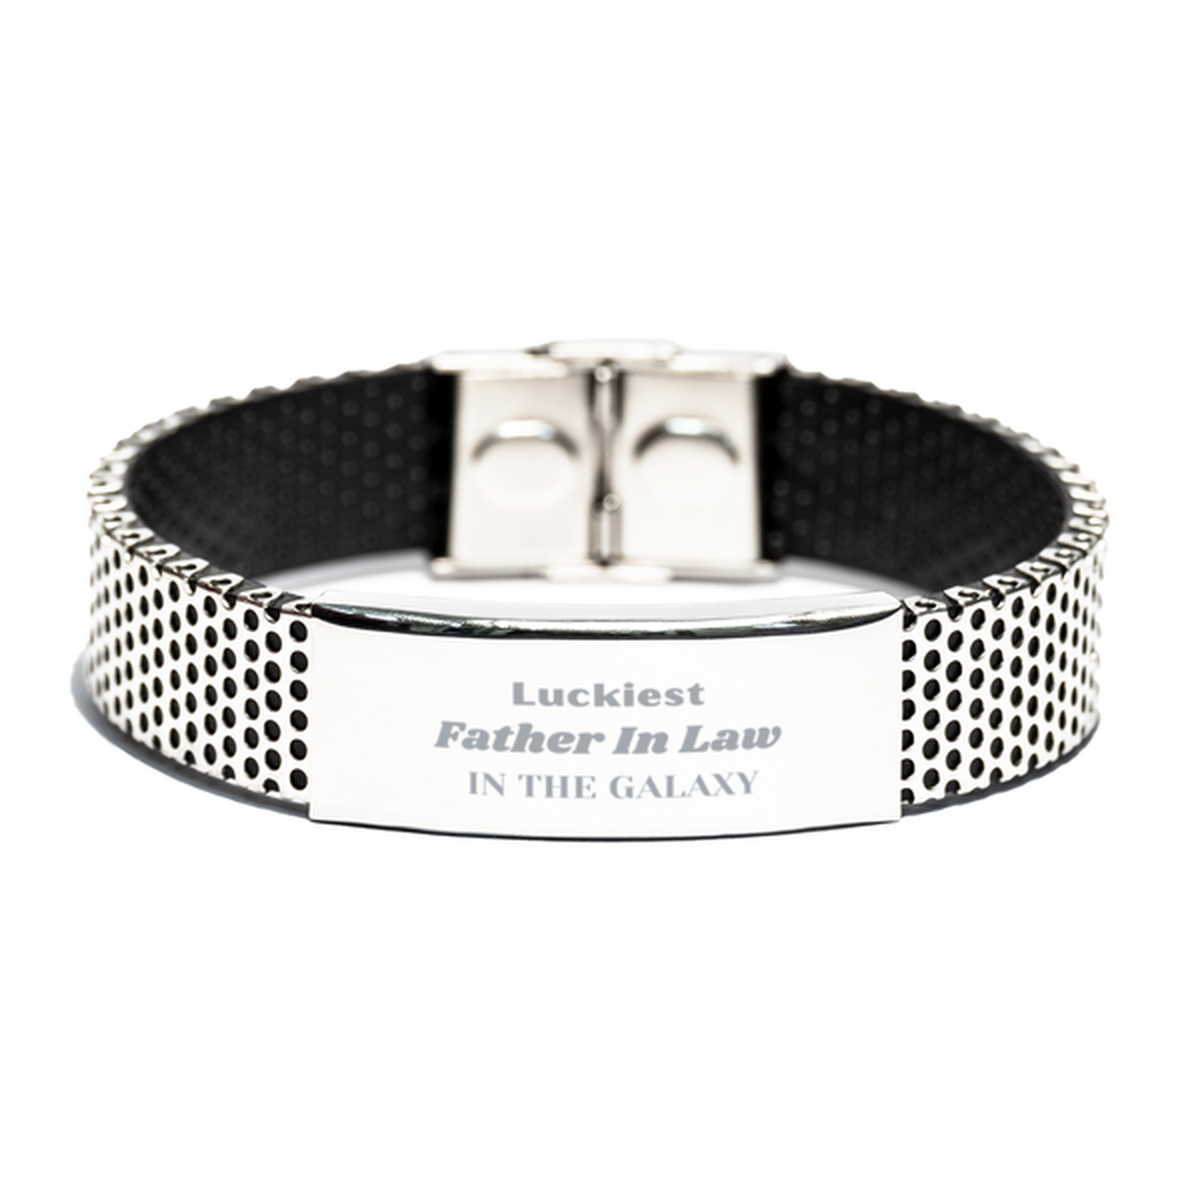 Luckiest Father In Law in the Galaxy, To My Father In Law Engraved Gifts, Christmas Father In Law Stainless Steel Bracelet Gifts, X-mas Birthday Unique Gifts For Father In Law Men Women